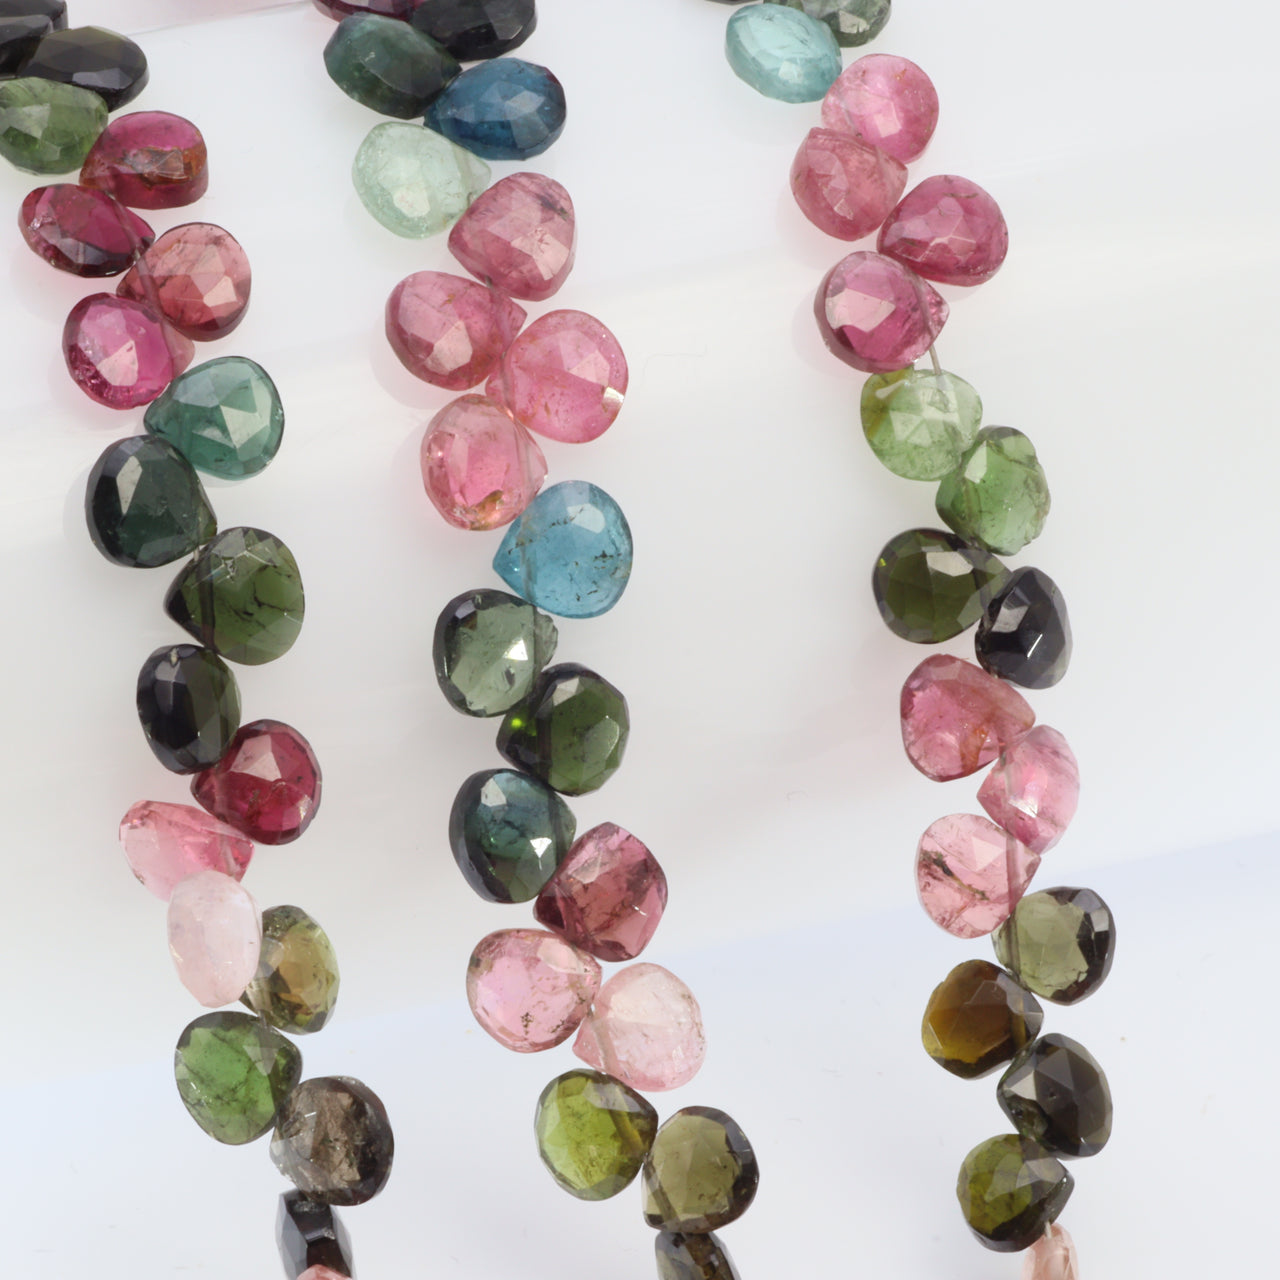 Watermelon Tourmaline 6mm Faceted Heart Shaped Briolettes